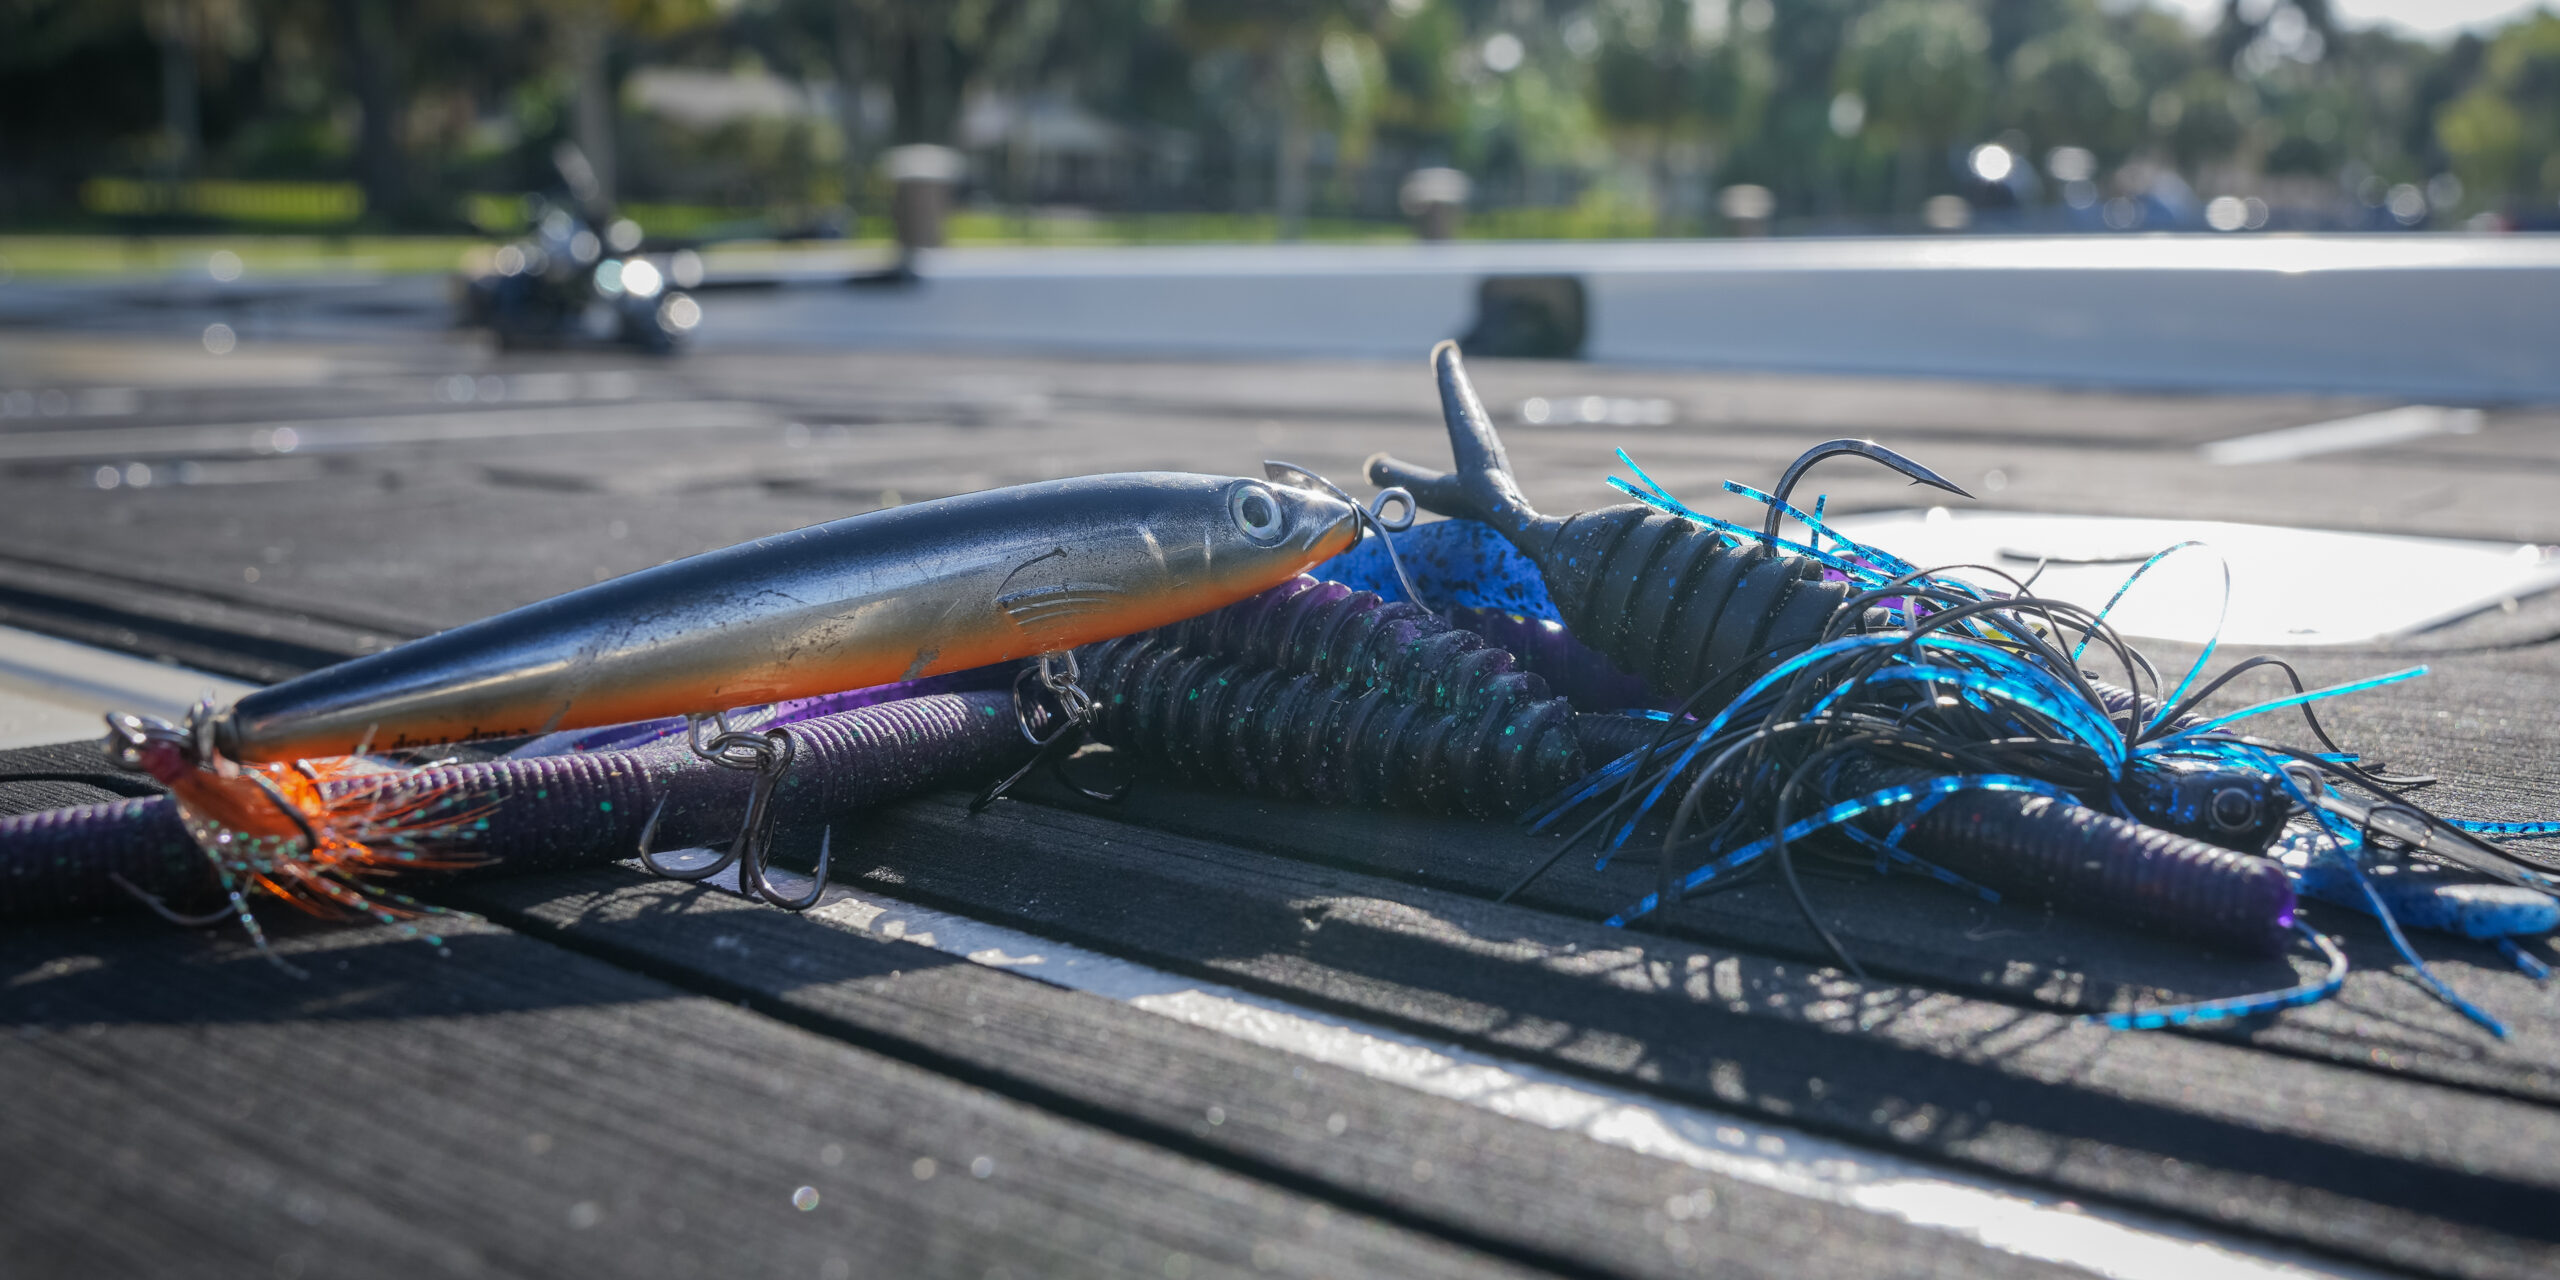 New Lures Made For Forward-Facing Sonor - Texas Fish & Game Magazine